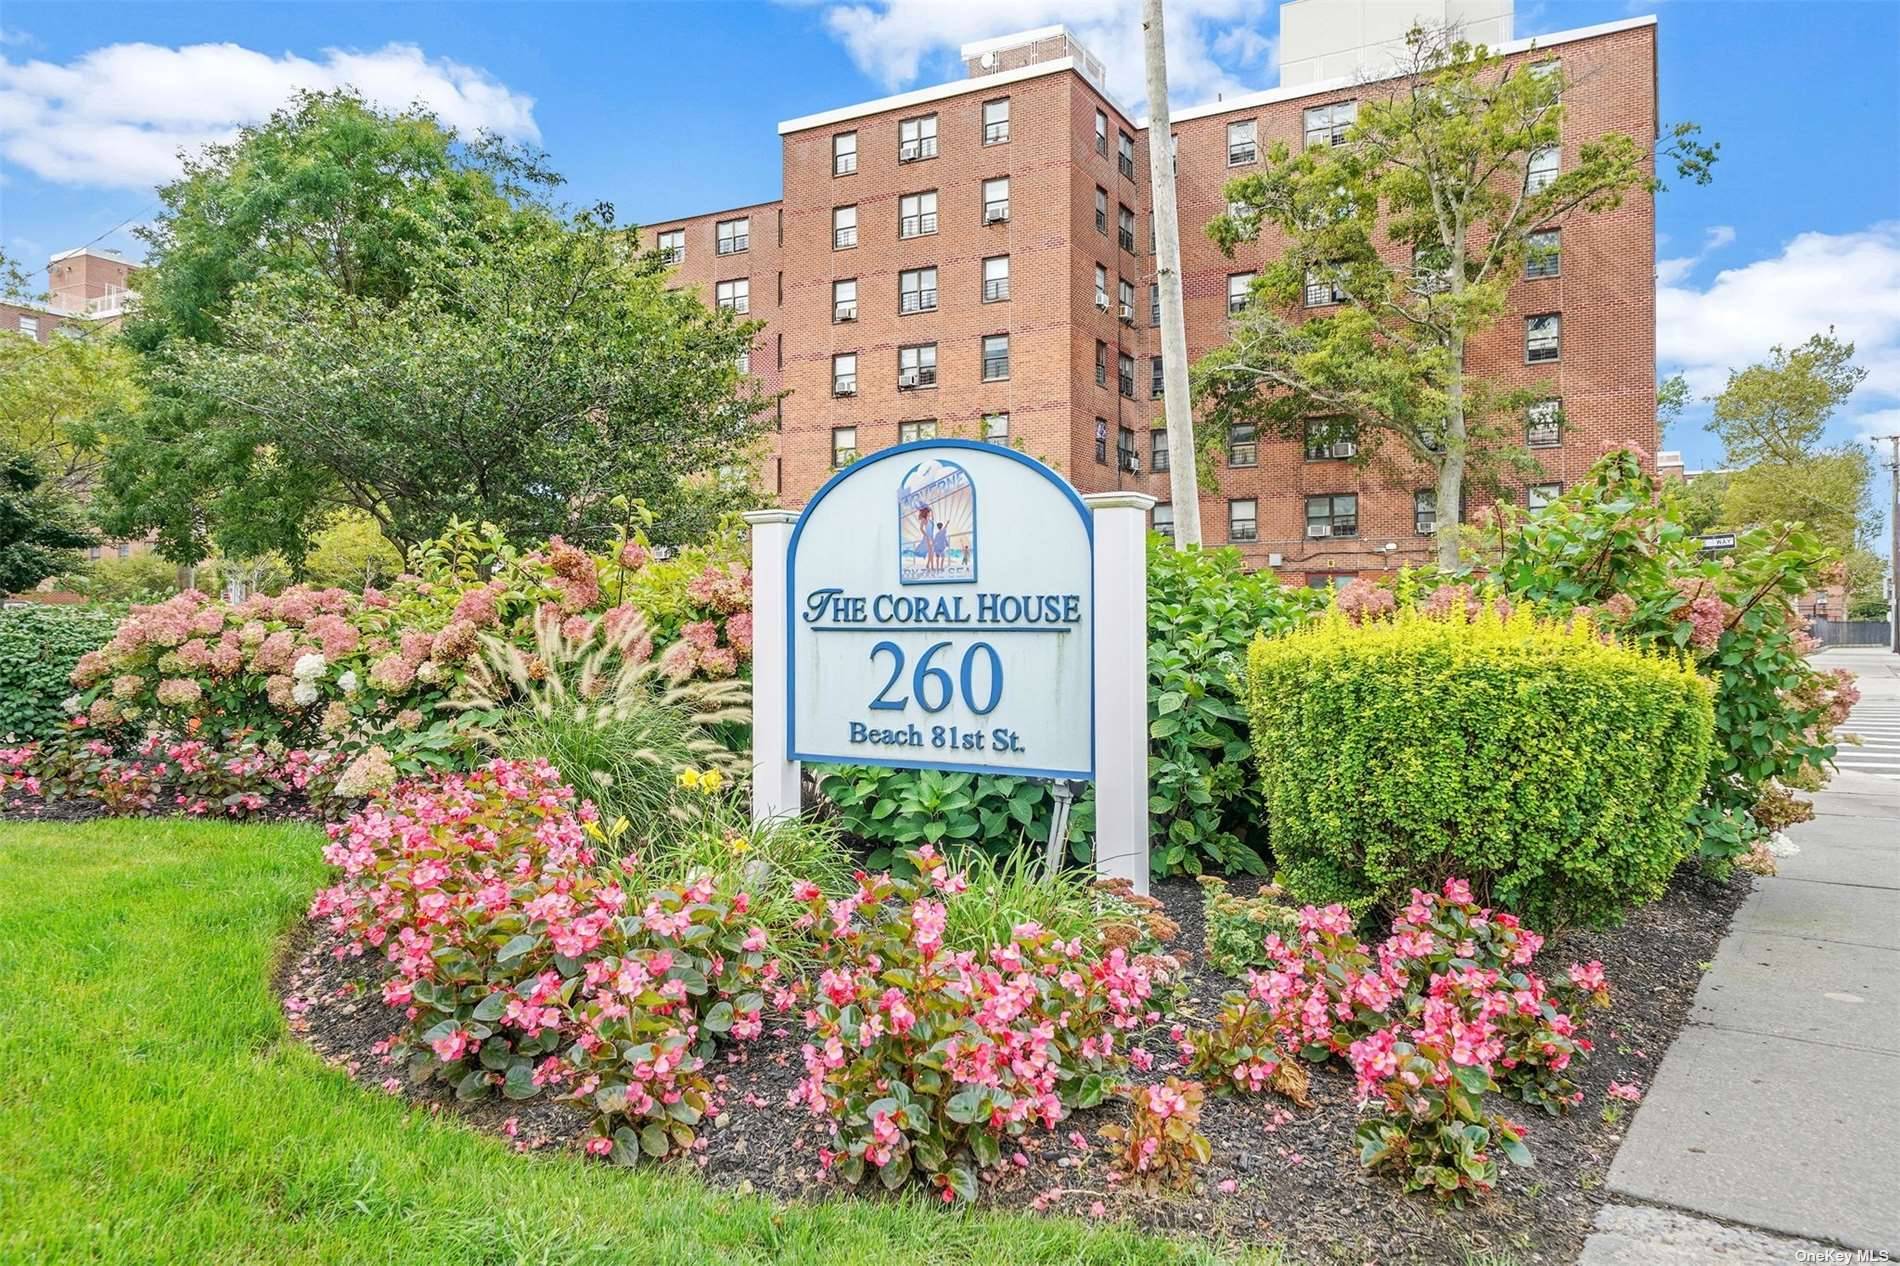 WECOME TO THE CORAL HOUSE A PET FRIENDLY BUILDING WITH OCCASIONAL DOORMAN PLUS 24 HOUR SECURITY SURVEILLANCE CAMERAS A SEASIDE CONDOMINIUM LOCATED JUST ONE BLOCK FROM THE MOST DESIRABLE ROCKAWAY ...